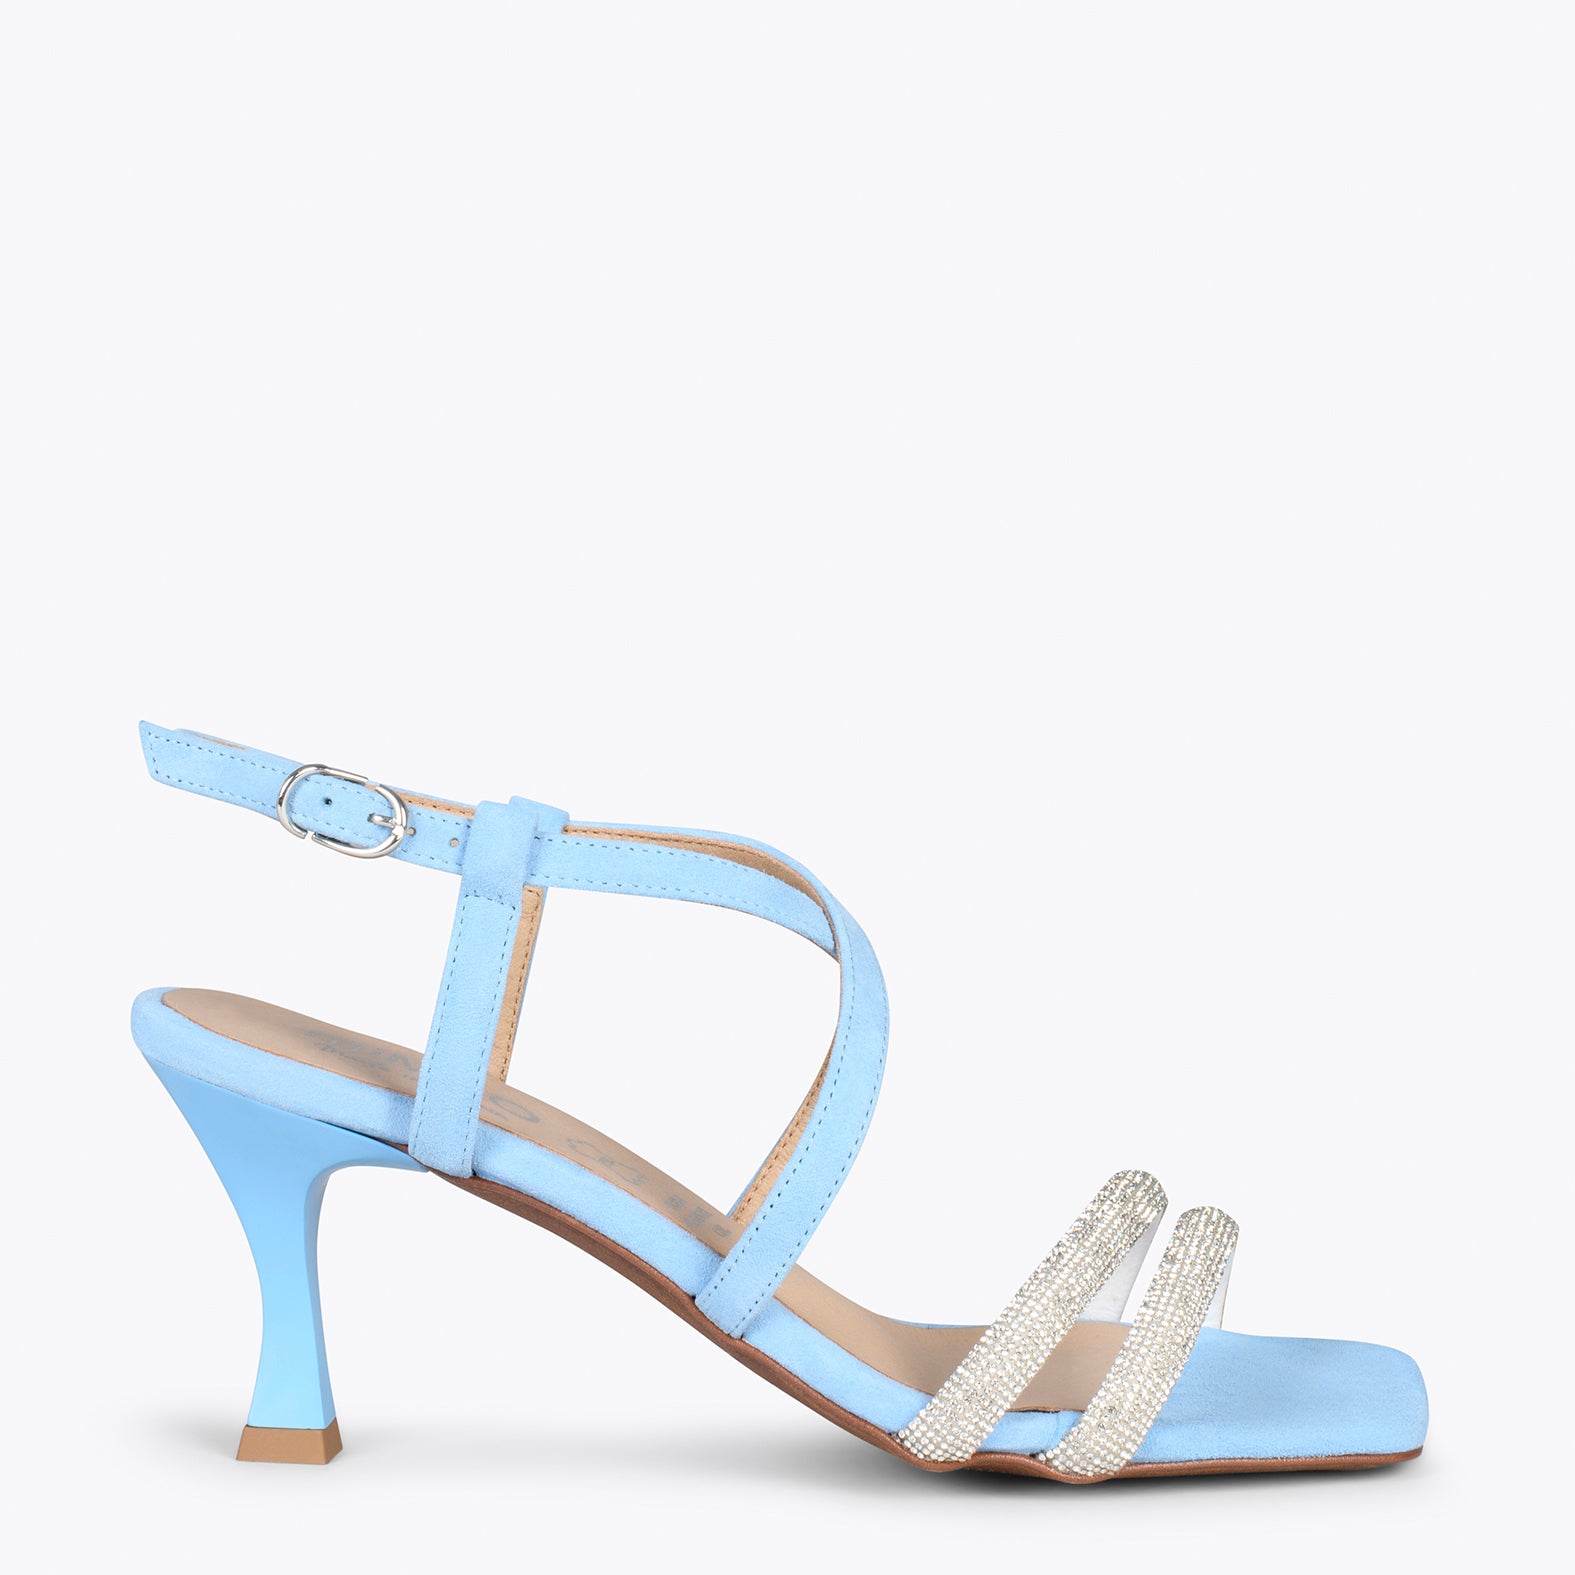 SHINY – BLUE high heel sandals with strass straps